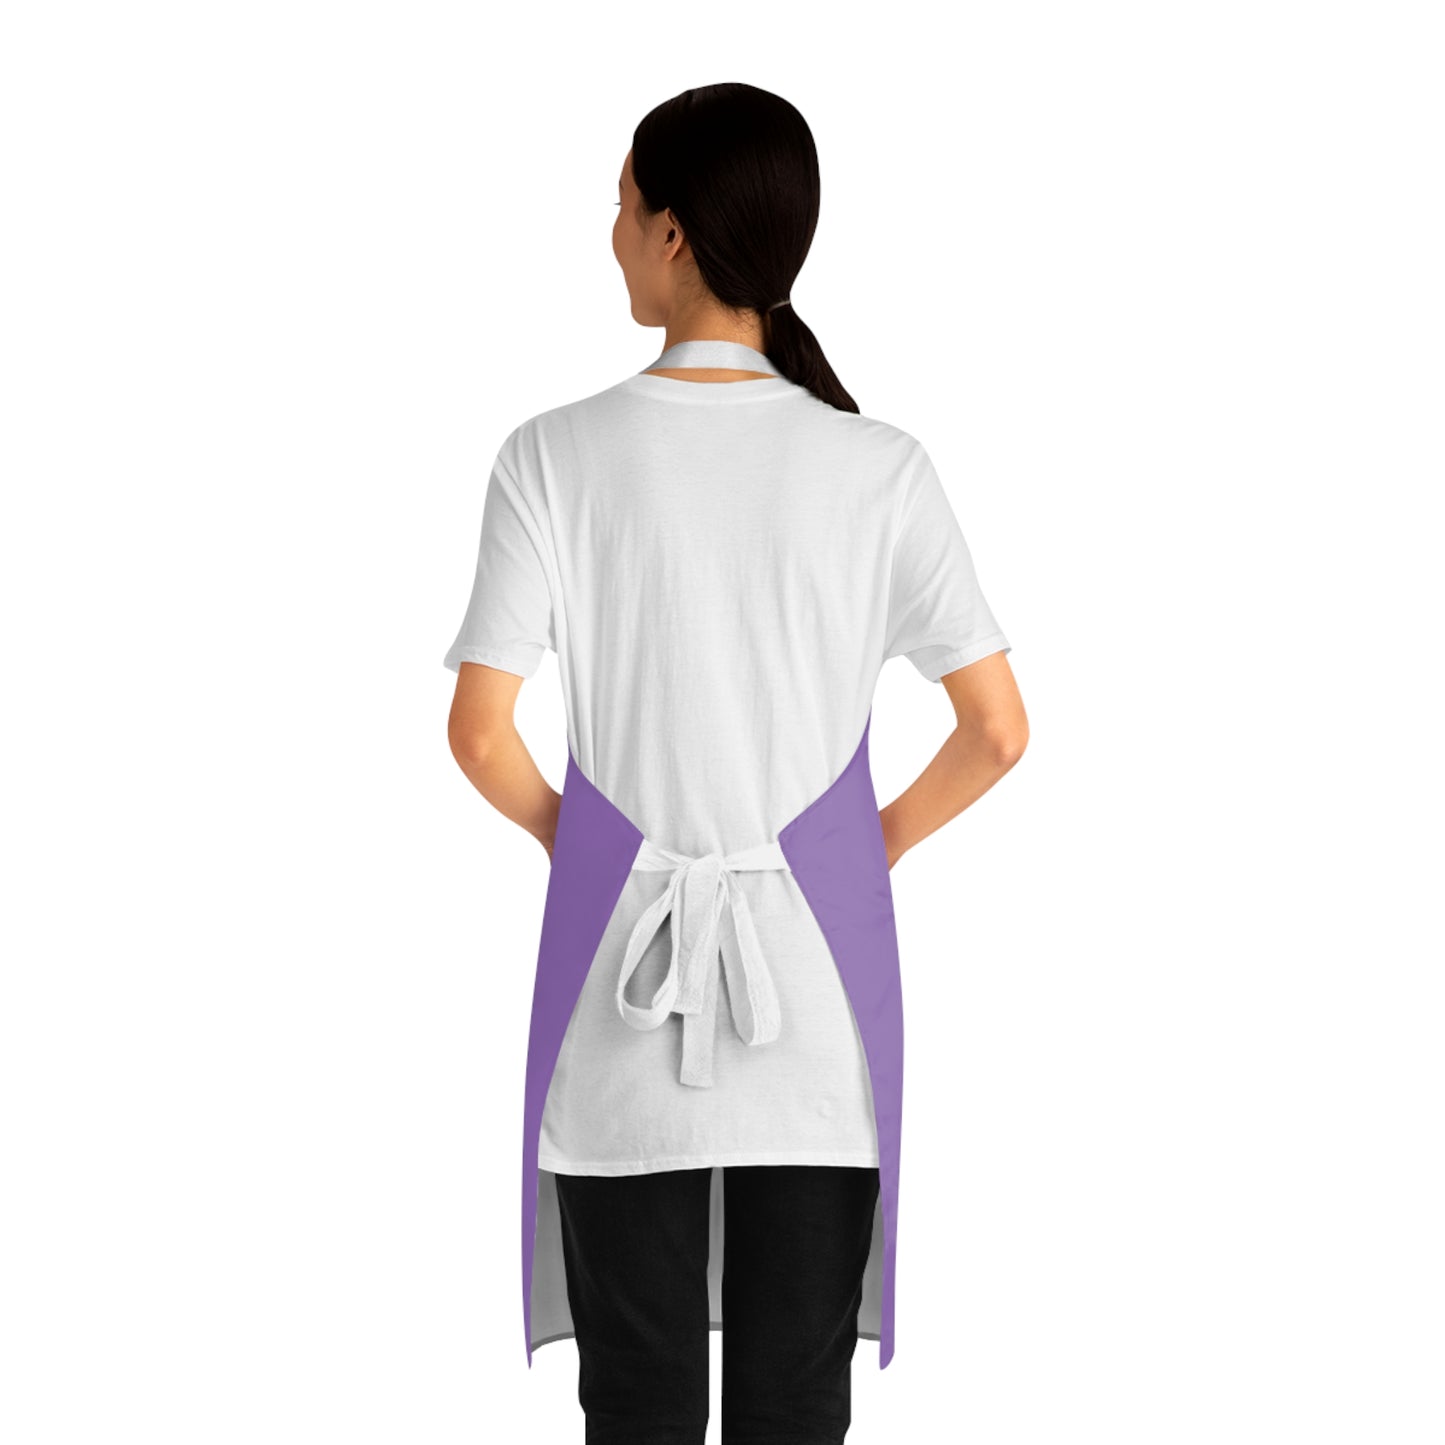 purple apron with logo Don't be a Salty Heifer